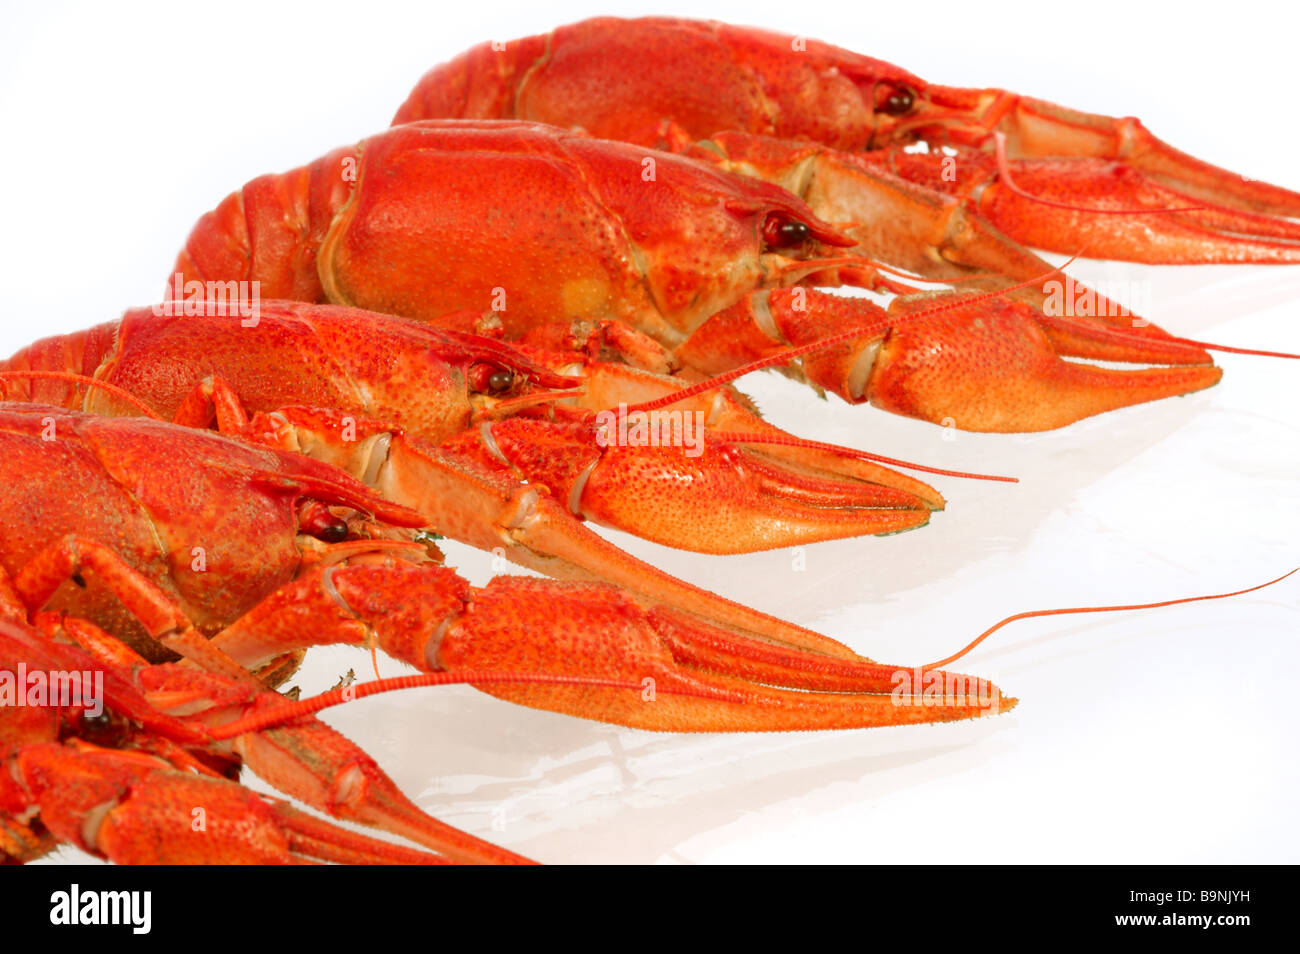 River crayfish on a white background It is very tasty and dietary food Stock Photo